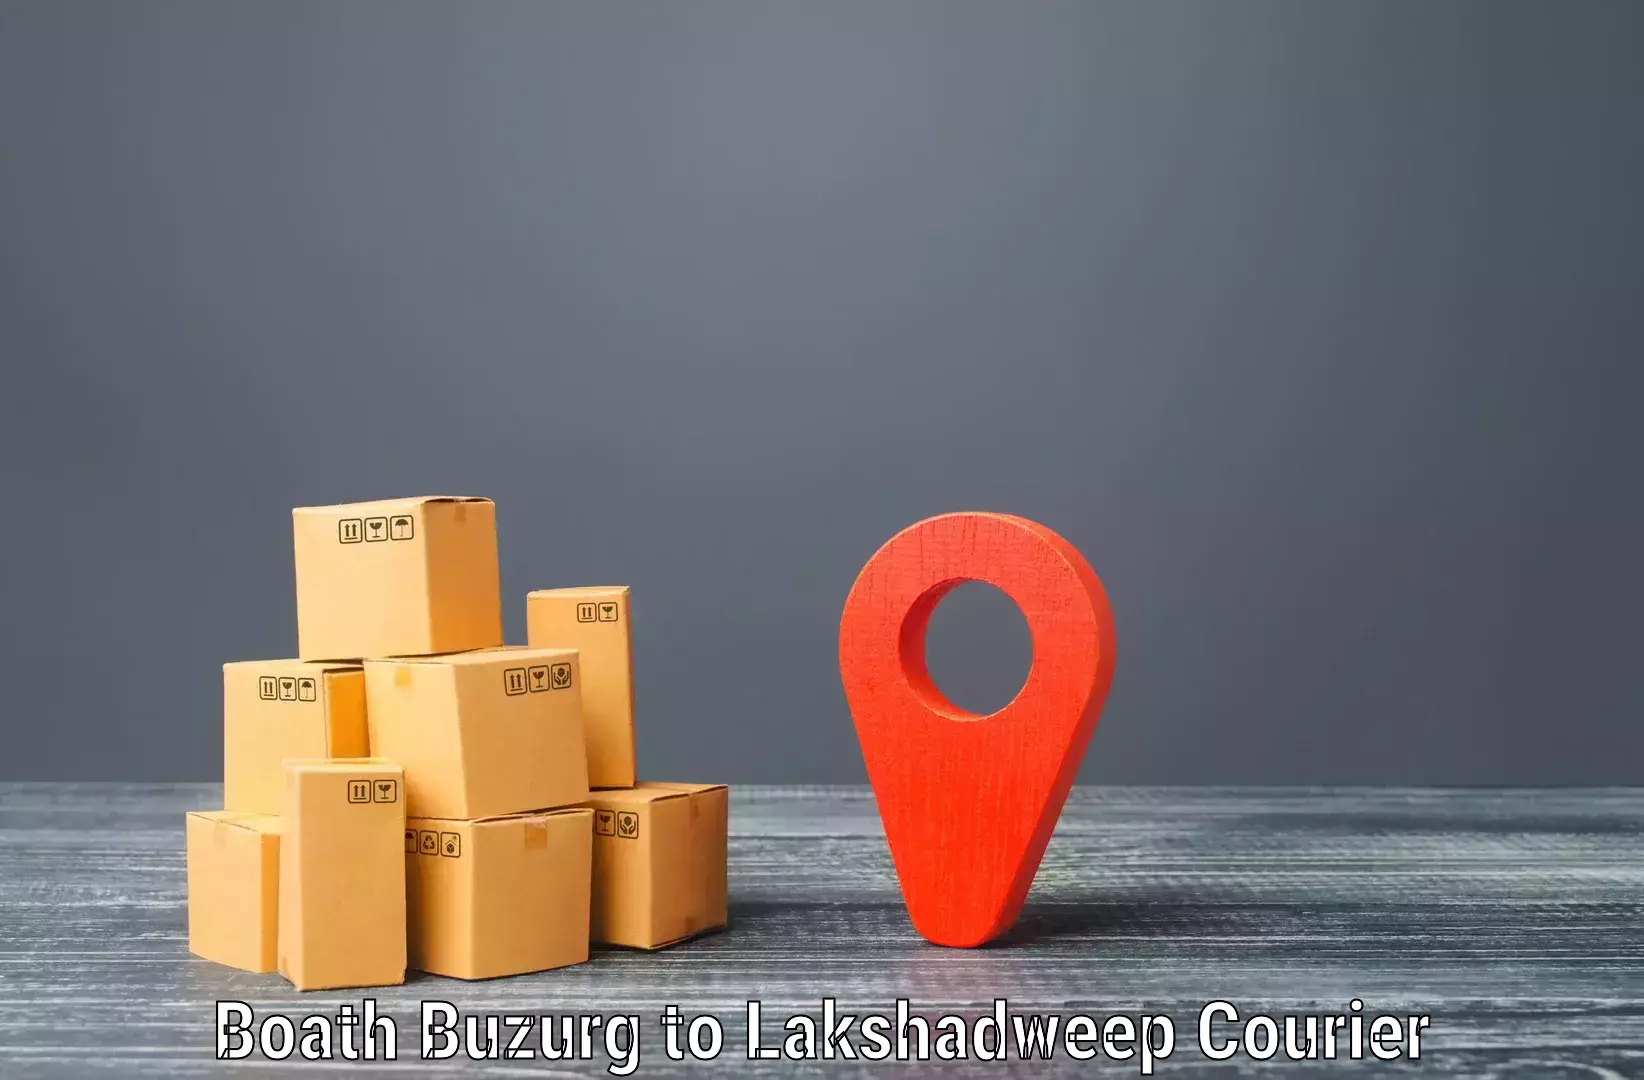 Fast-track shipping solutions Boath Buzurg to Lakshadweep